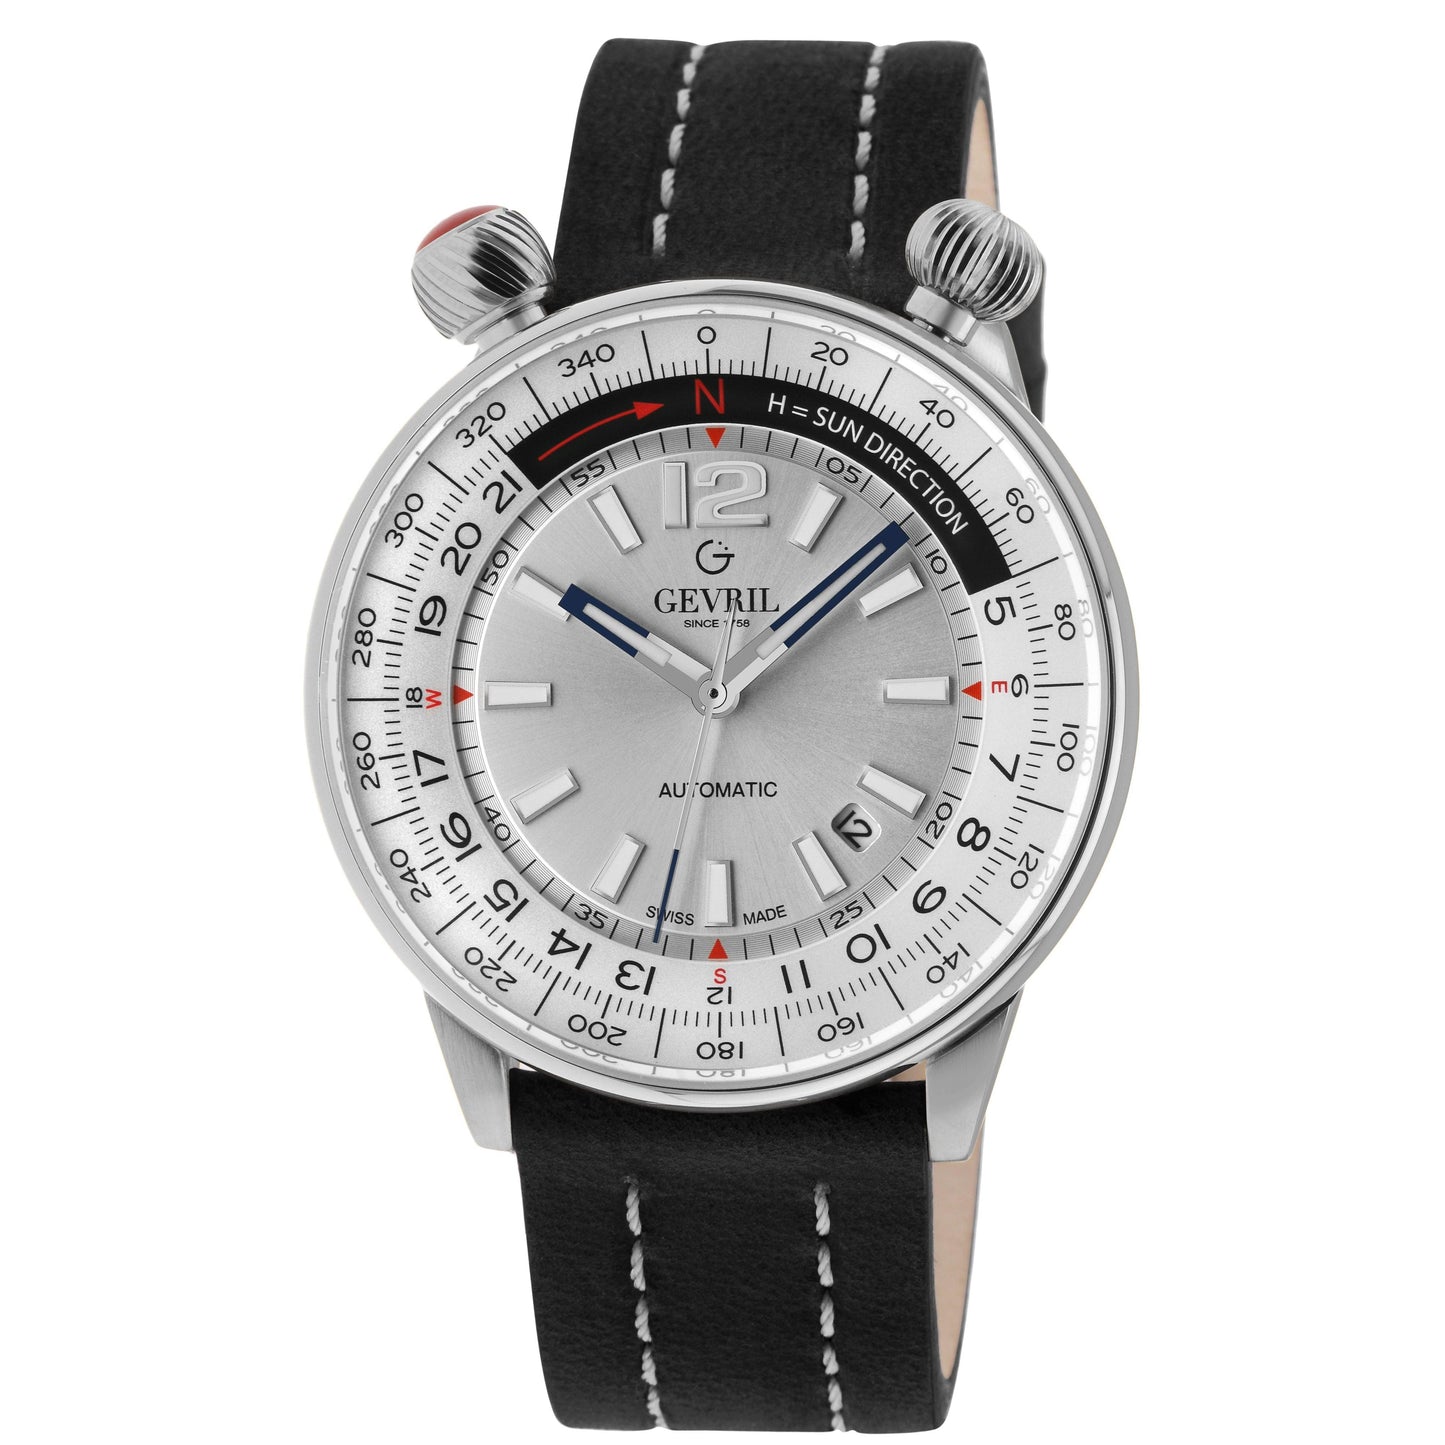 Gevril-Luxury-Swiss-Watches-Gevril Wallabout - Solar Compass-48560A